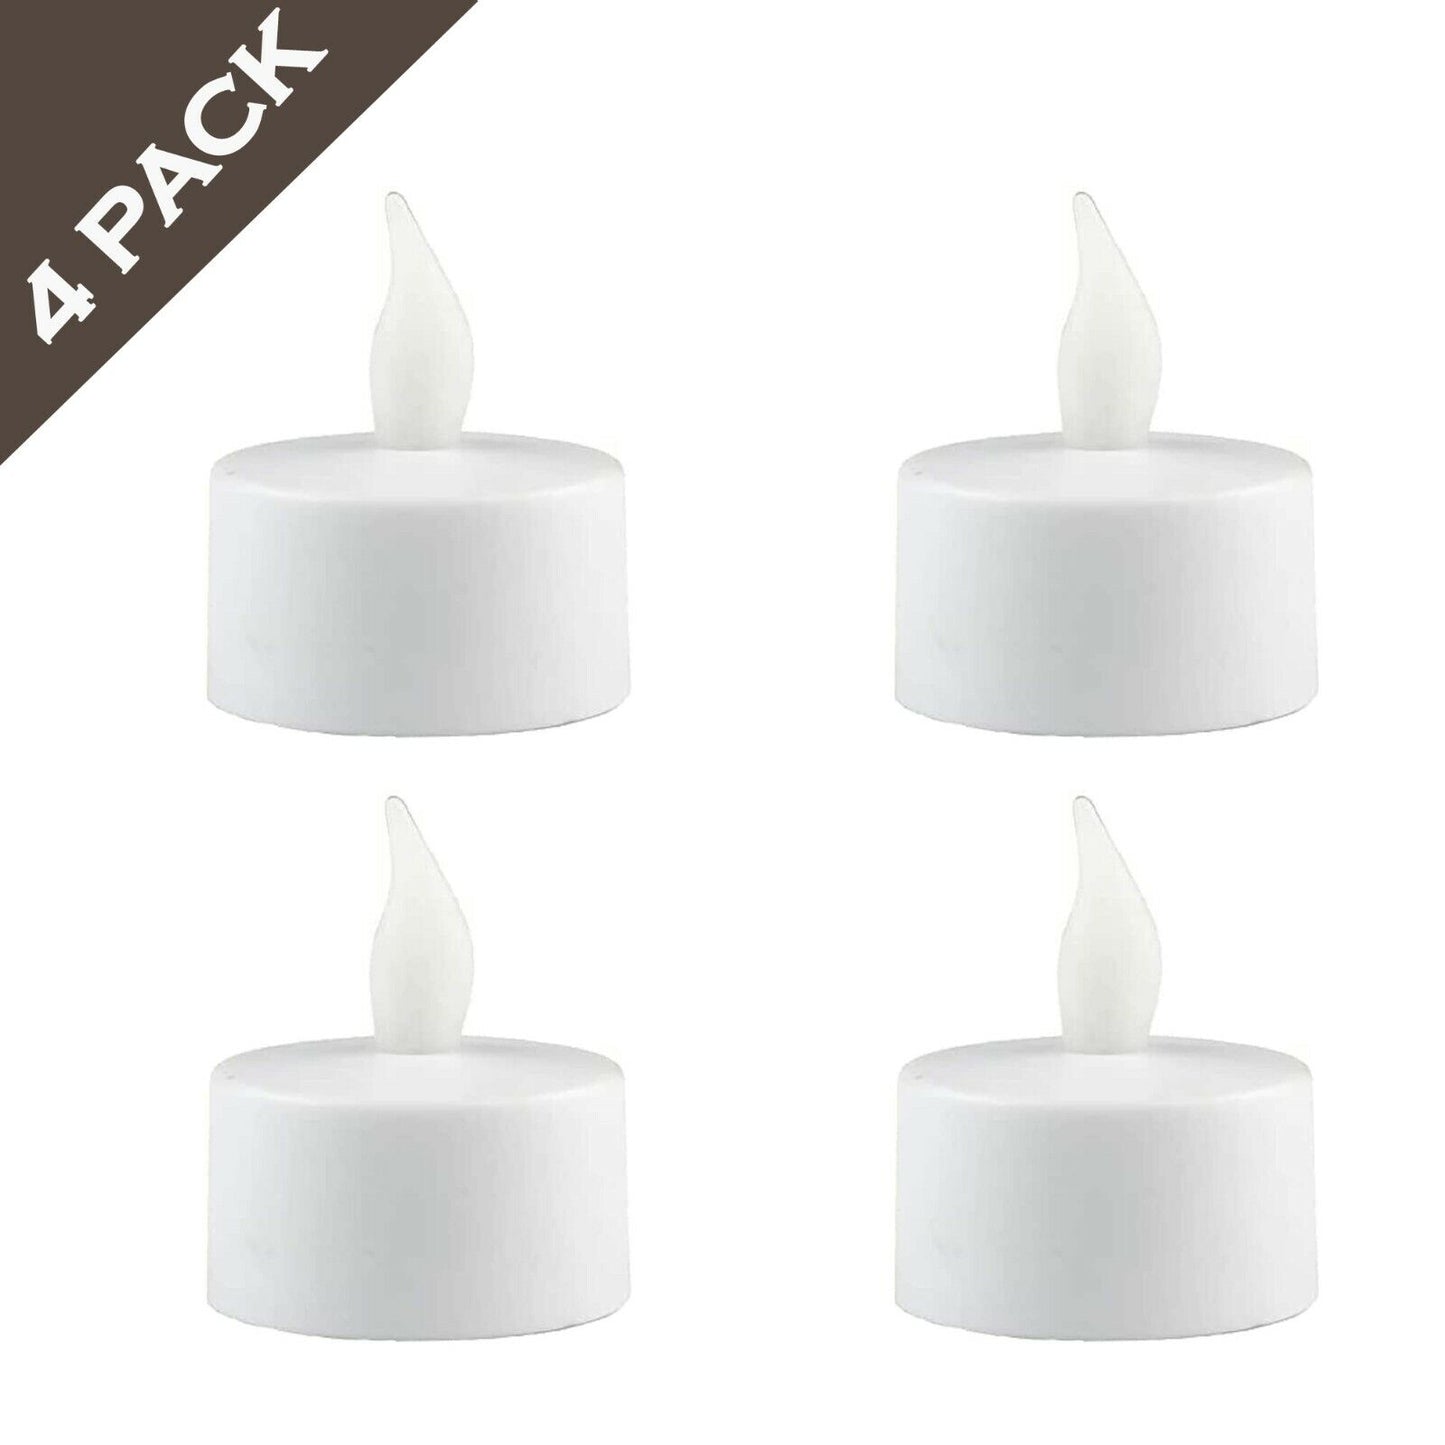 4 X White Flameless LED Tea Lights Candles Flickering Battery Operated Tealights